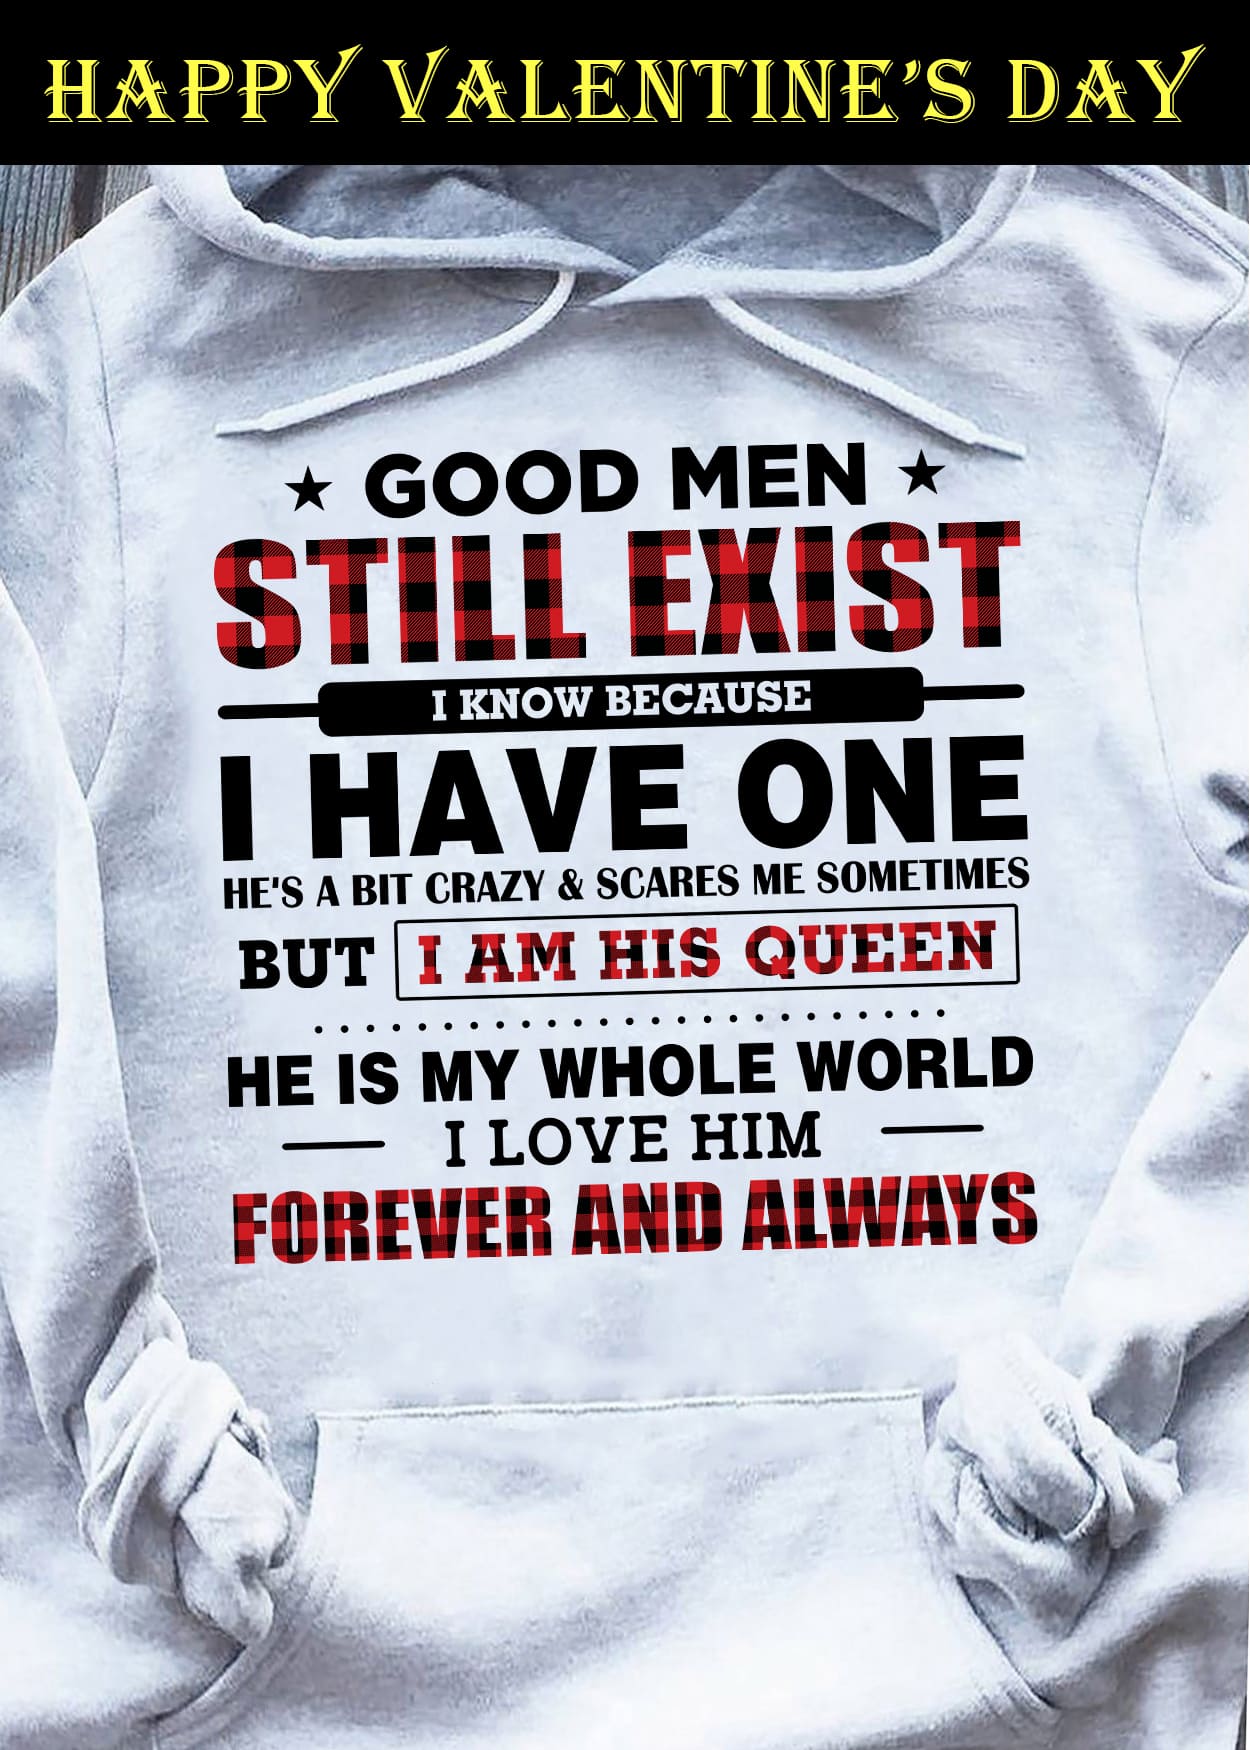 Good men still exist, I know becaus I have one - Gift for married couple, family T-shirt This T-Shirt, Hoodie, Sweatshirt, Ladies T-Shirt, Youth T-shirt is for lovers like Good men still exist, Gift for married couple, family T-shirt . Shirt are much suitable for those who Love Hobbies, Holidays, Pets, Movies, Out Door, Sport.